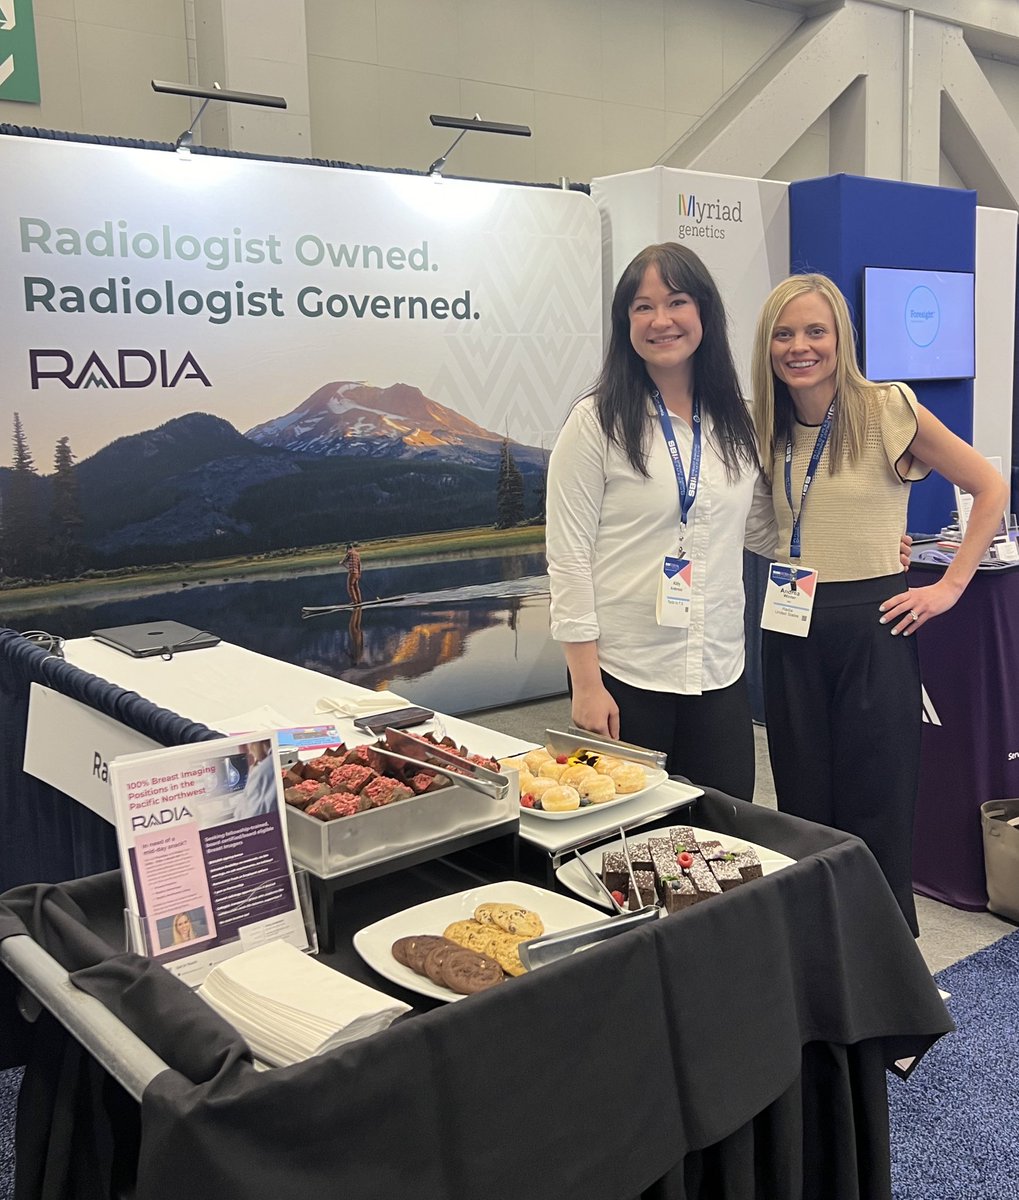 Great mammo group in the Seattle area. 🏔️Flexible scheduling, work life balance, $100k signing bonus. Come meet Abby & Shari at the Radia booth 100 to learn more. Delicious desserts & pastries 🥐 today at 2:30 pm today. #SBI2024 #SBIRFS #Radia #mammo